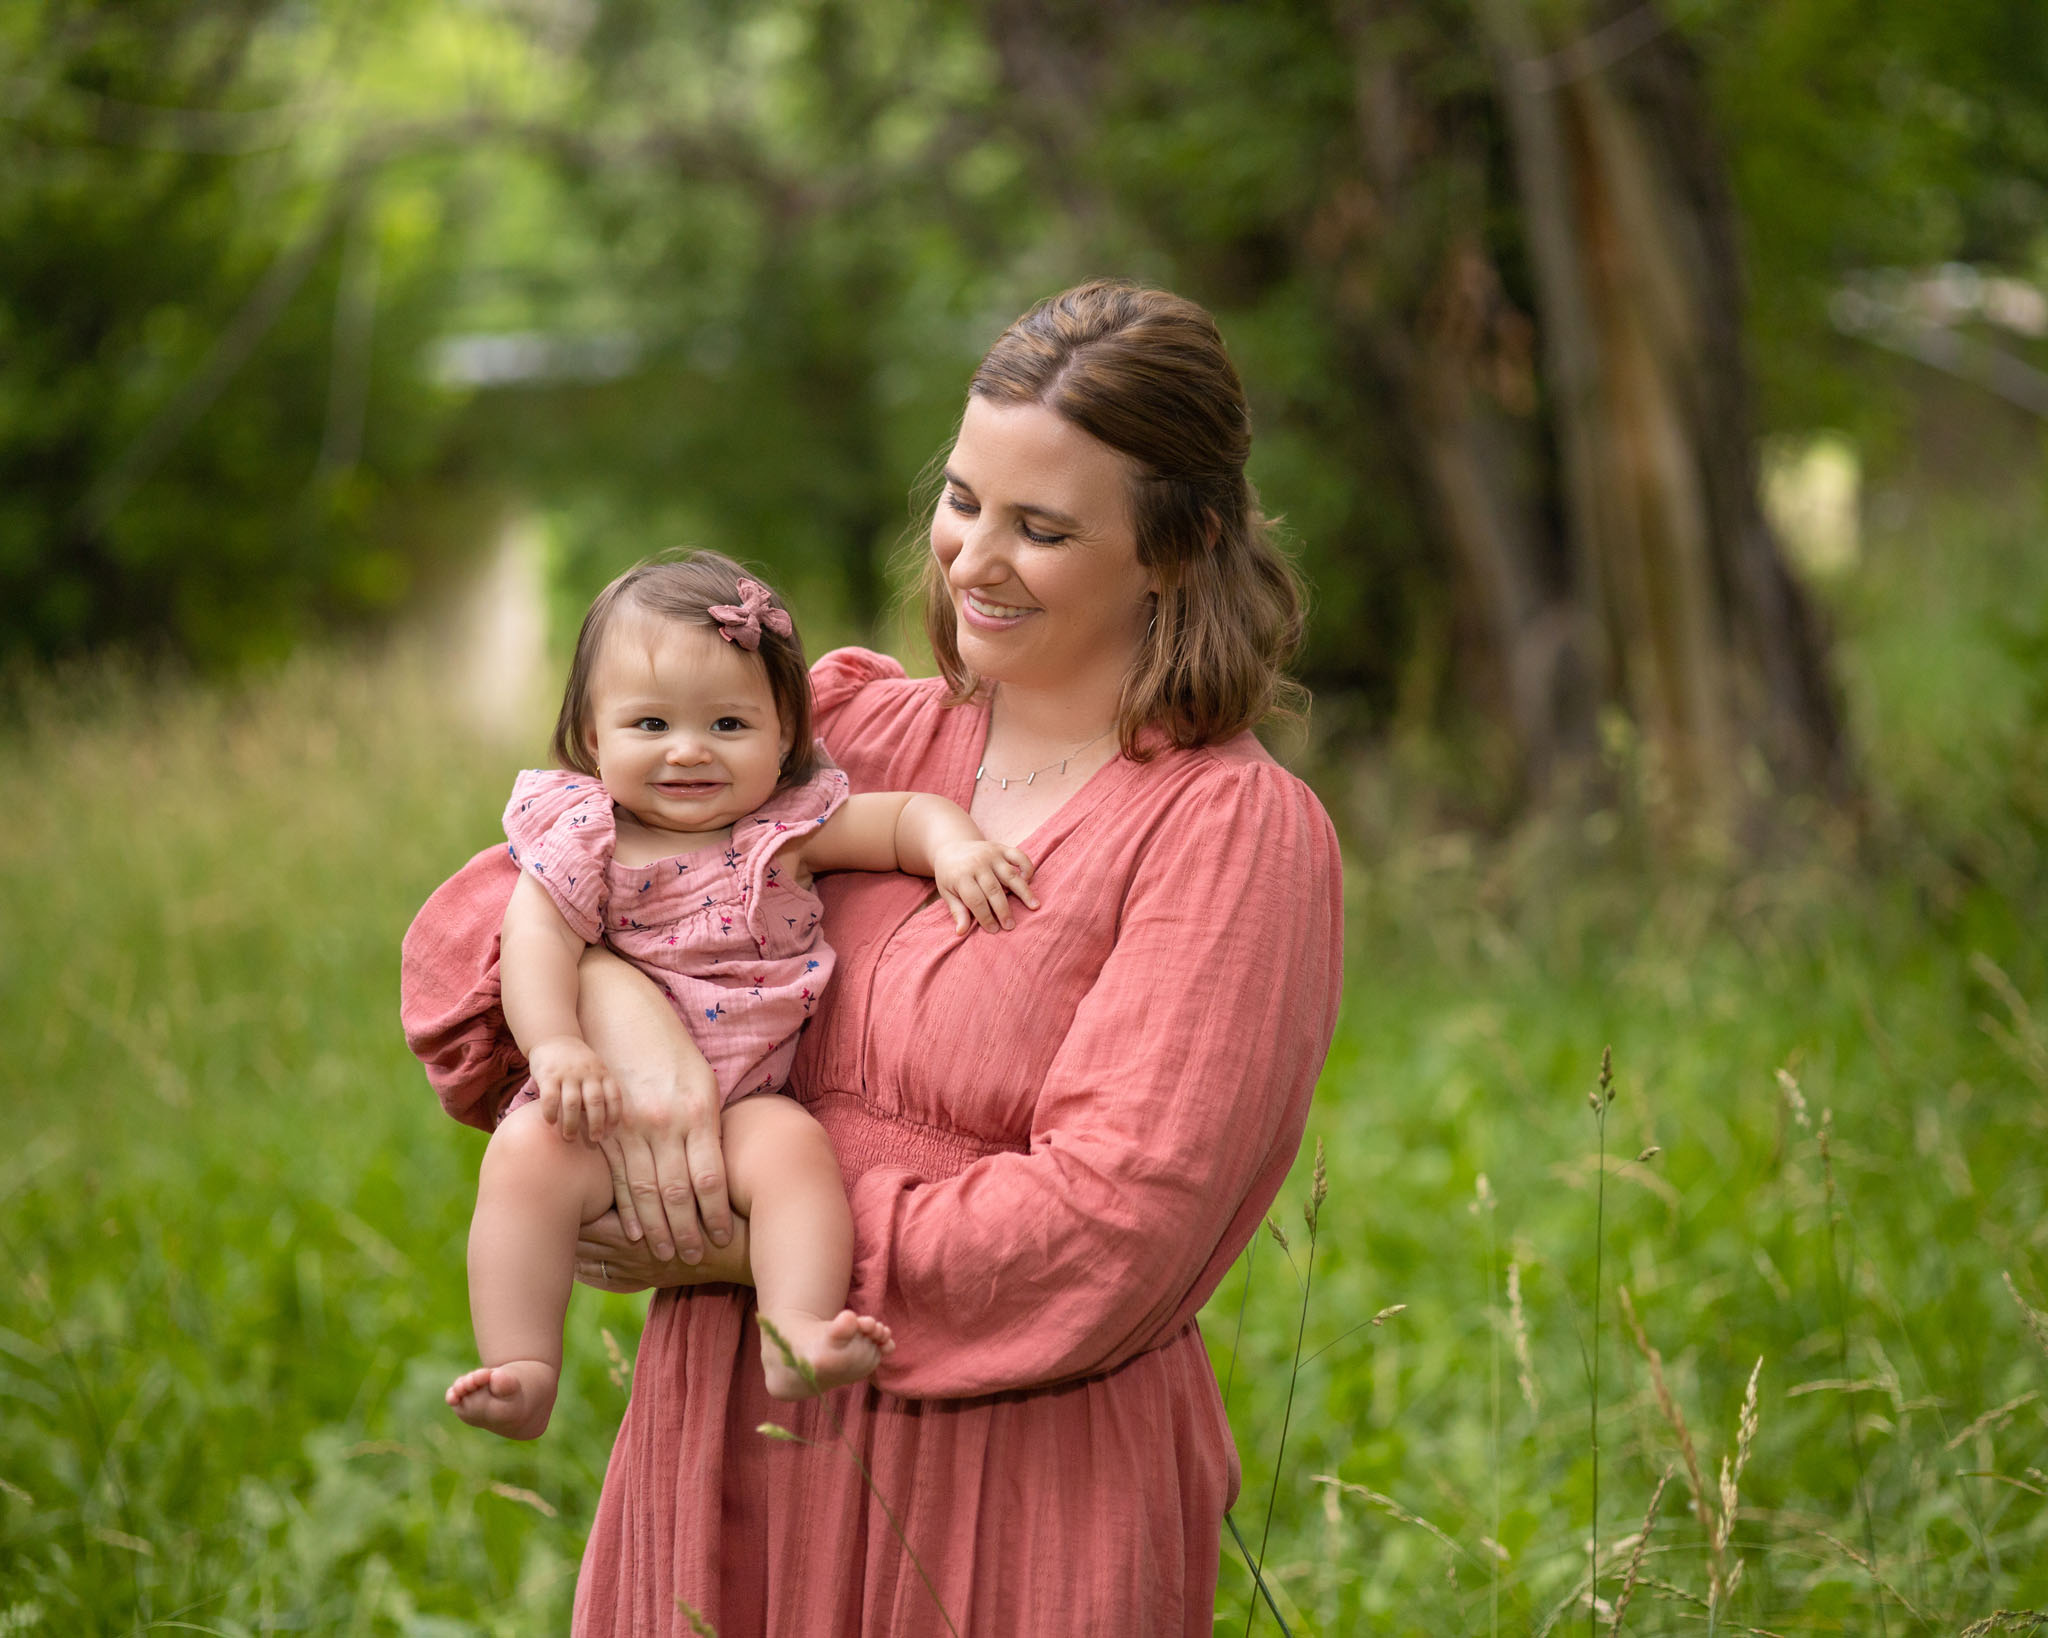 mom and baby daughter in pink outfits standing in a grassy field under trees in Pueblo CO